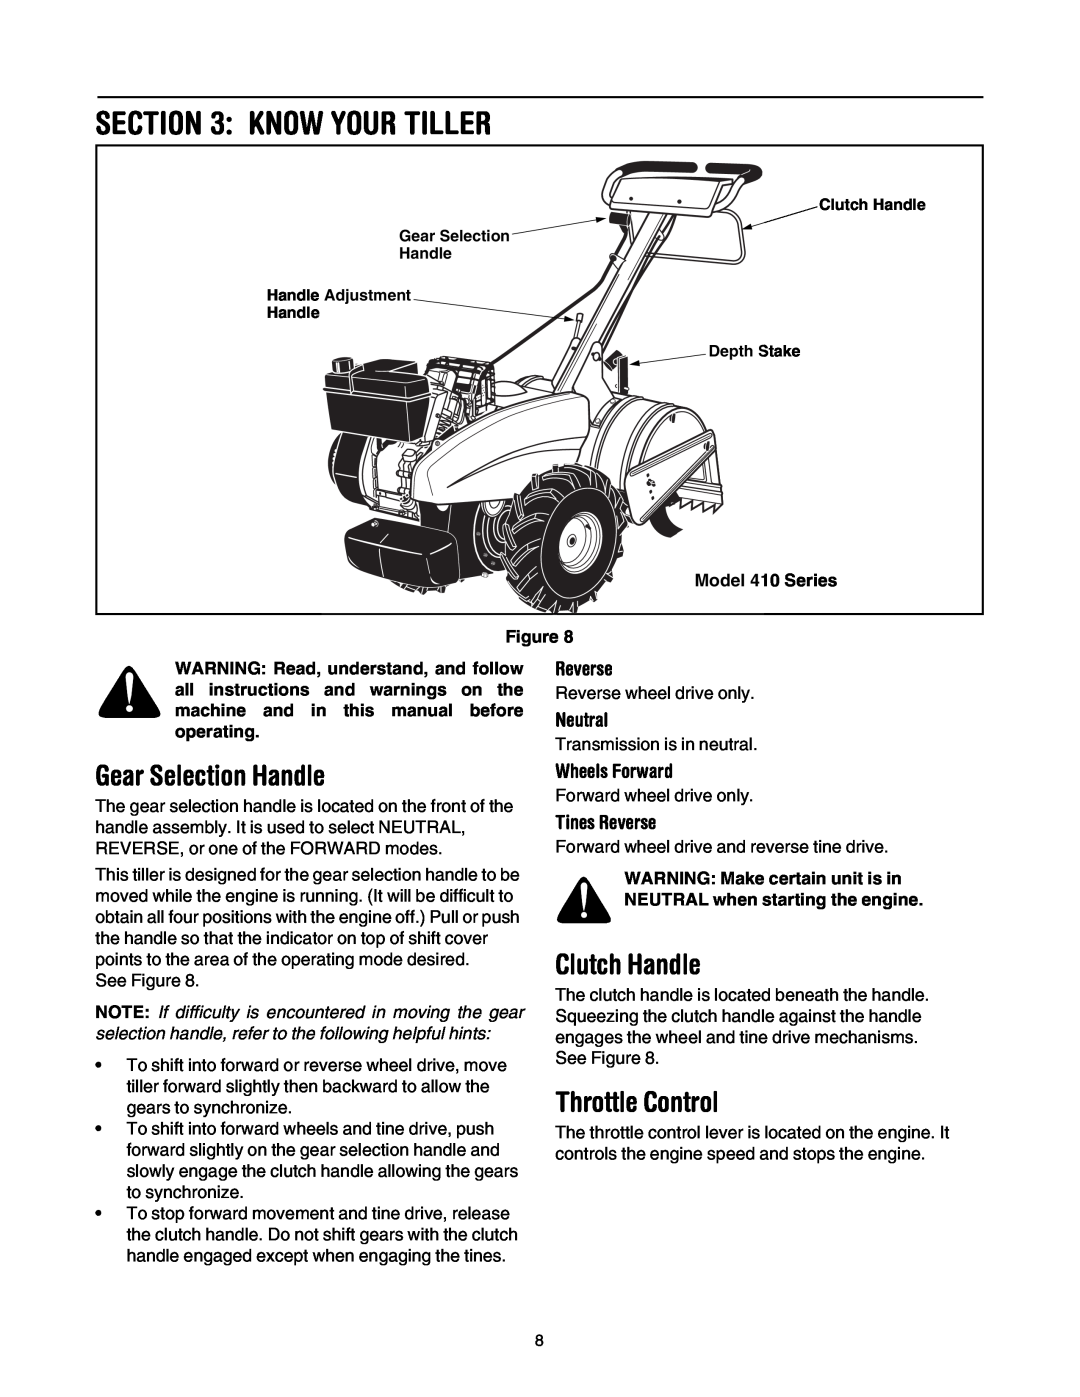 MTD 428C manual Know Your Tiller, Gear Selection Handle, Clutch Handle, Throttle Control, Reverse, Neutral, Wheels Forward 